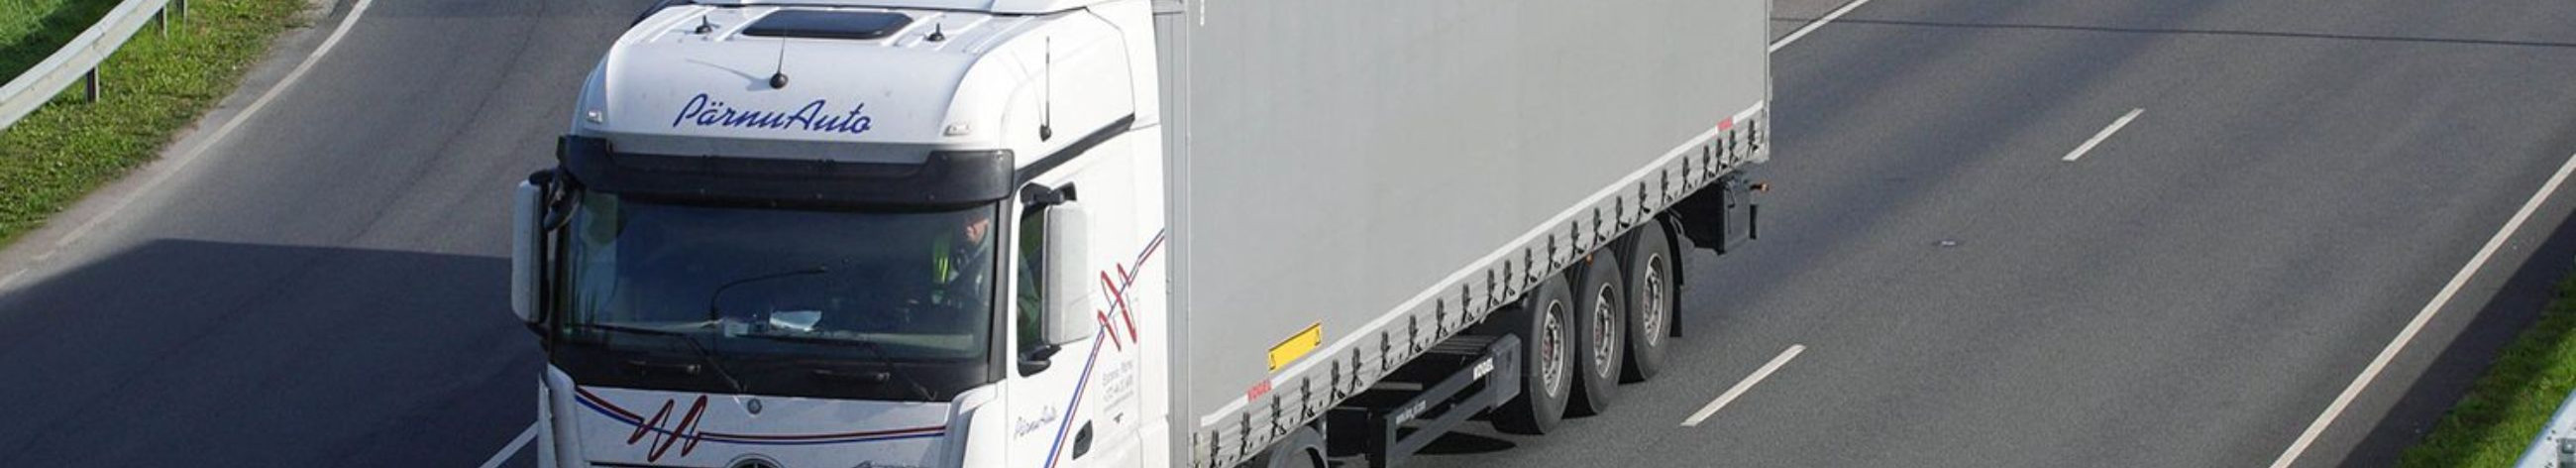 transport and courier services, international transport, domestic transport, Full load transport, Partial load transport, gas transport, Freight transport in Europe, transport services, road transport, Courier services